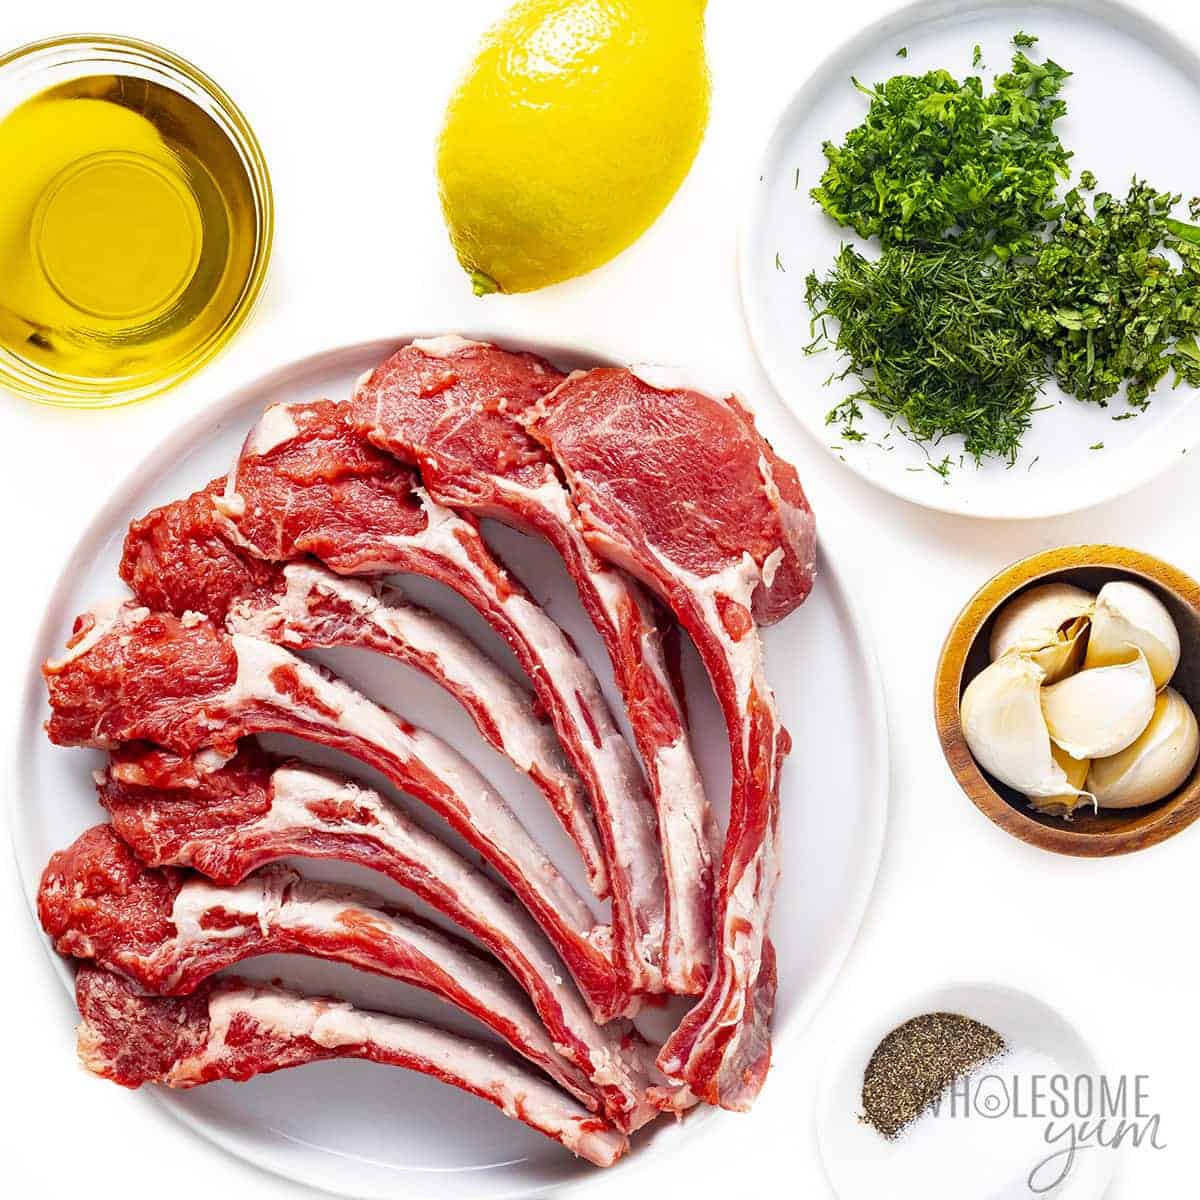 Ingredients for how to grill lamb chops on plates.